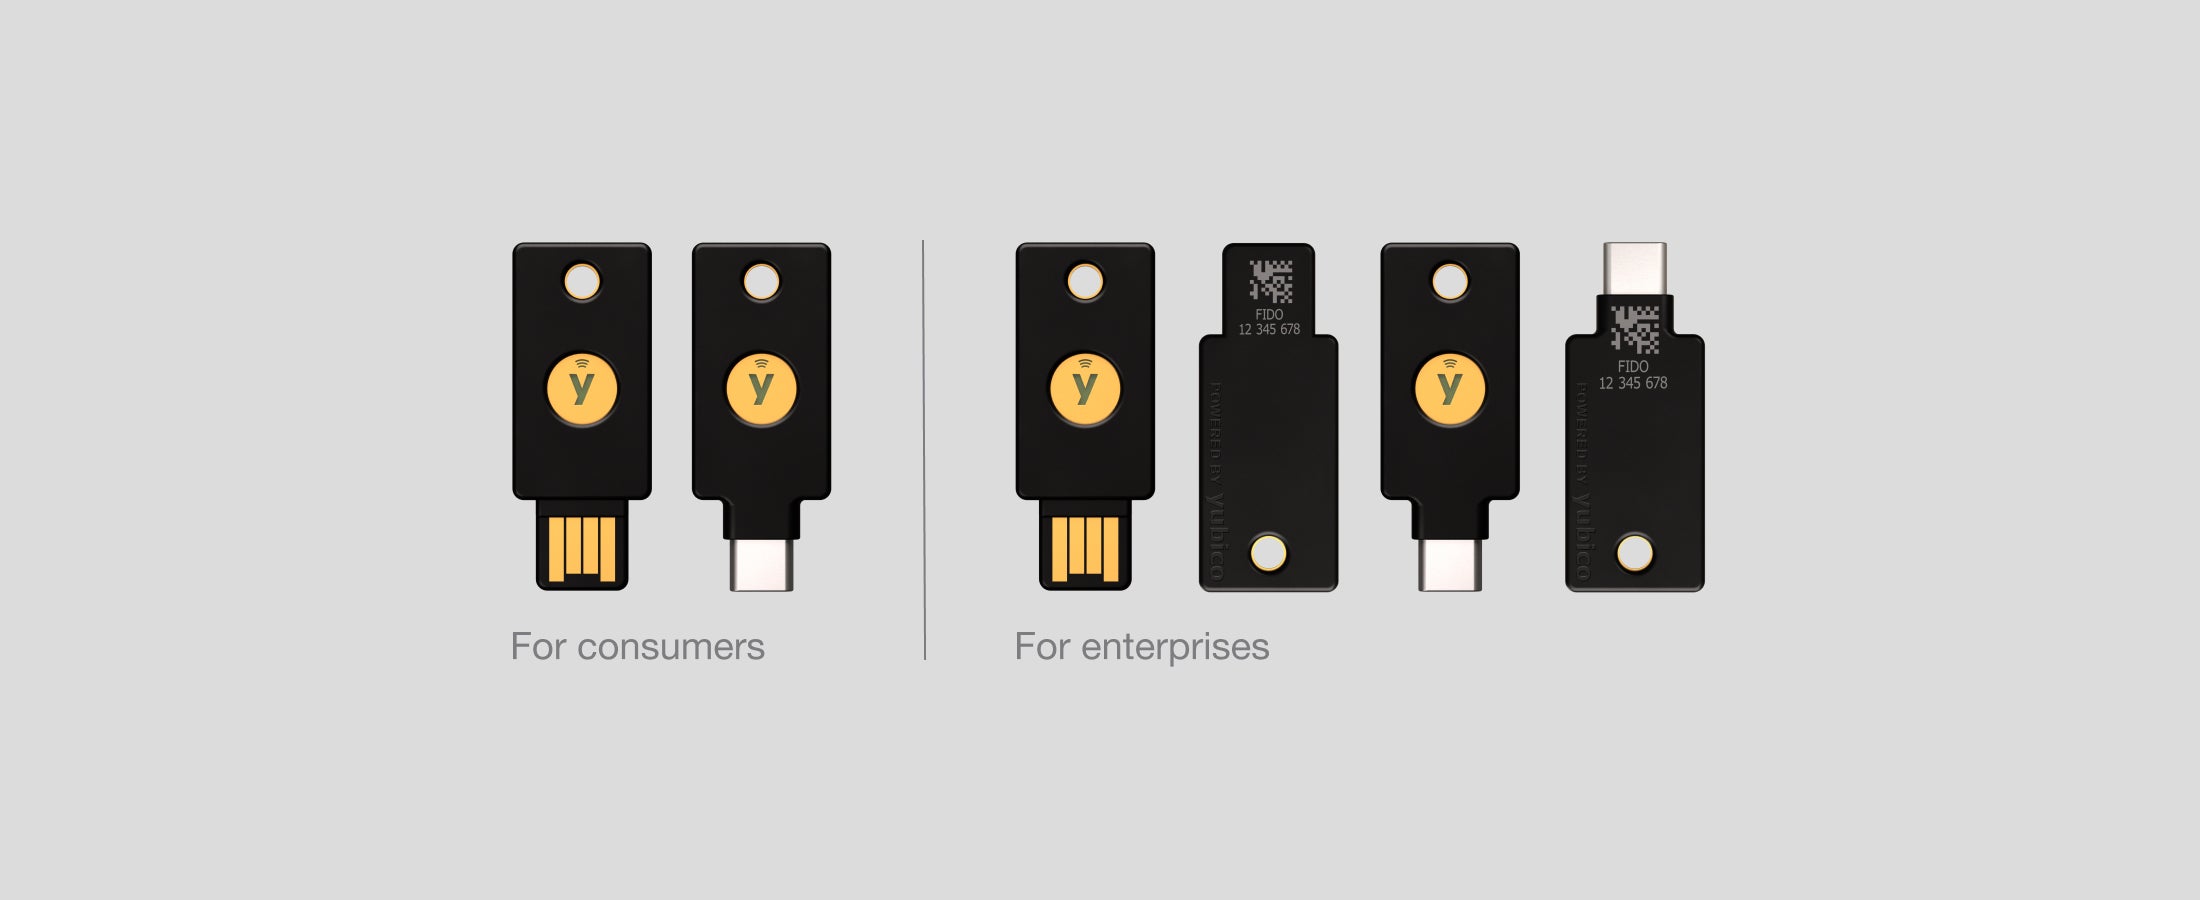 Security Key Series family